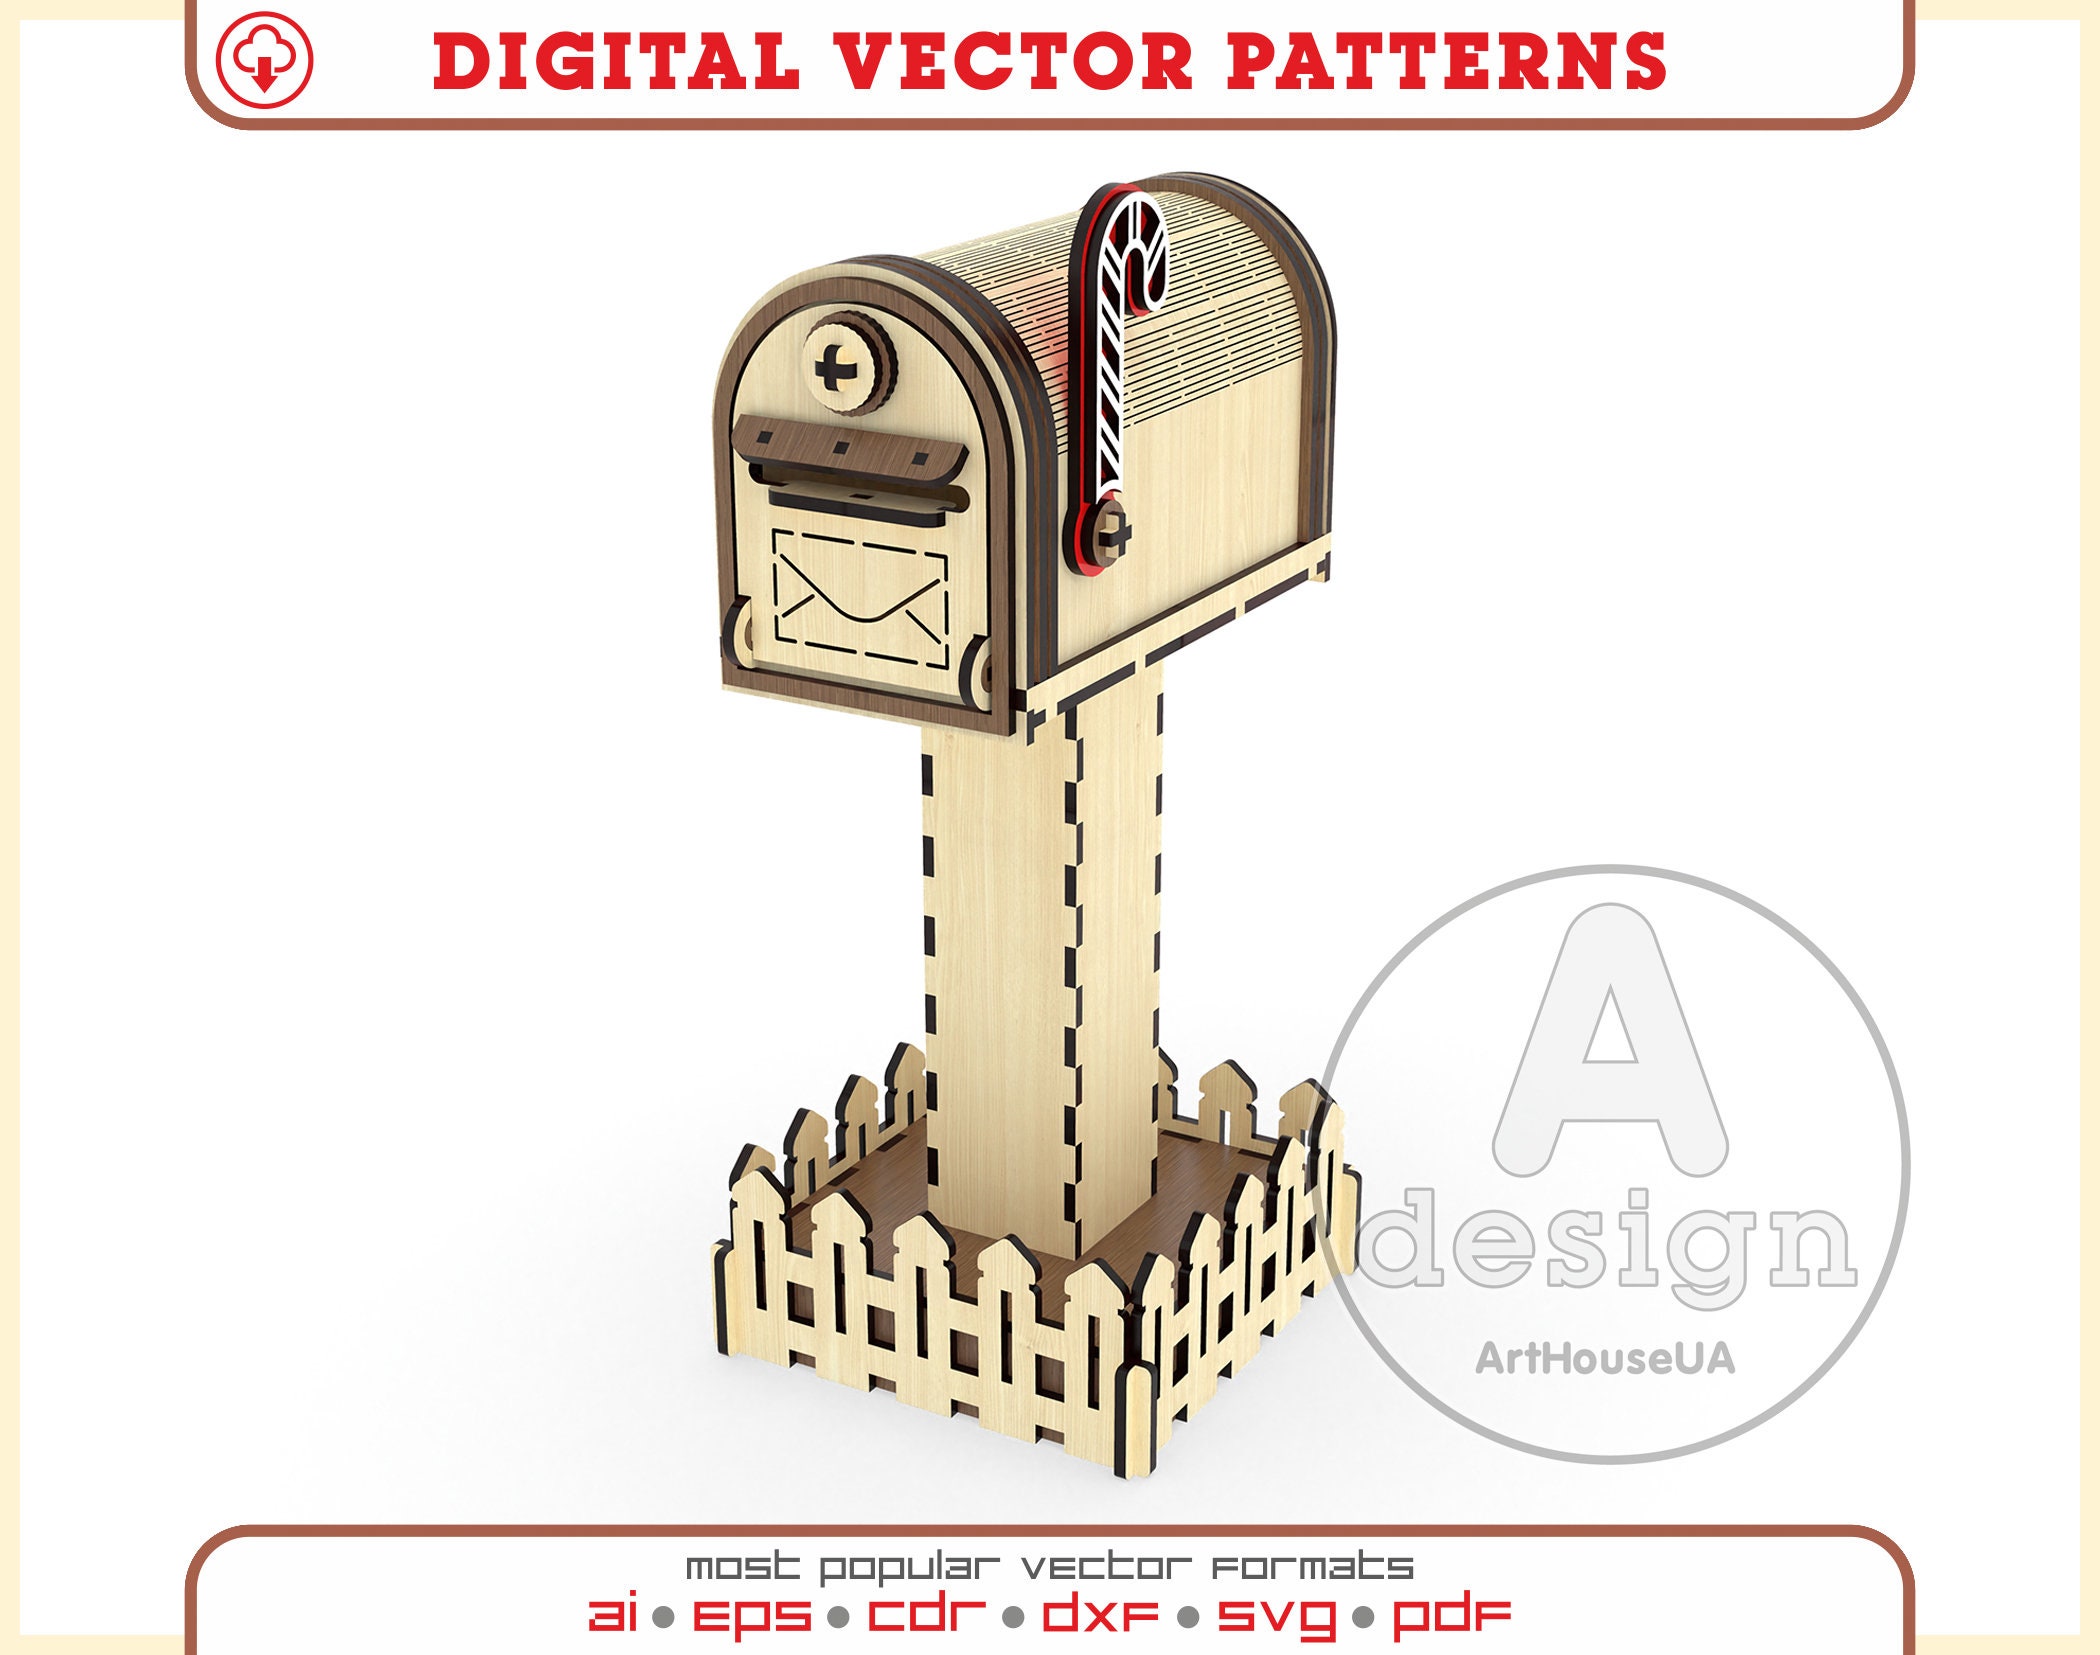 Mailbox with letters from children for Santa Claus. Classic decorative  Christmas post box on stick with envelopes and hand. 13454729 Vector Art at  Vecteezy